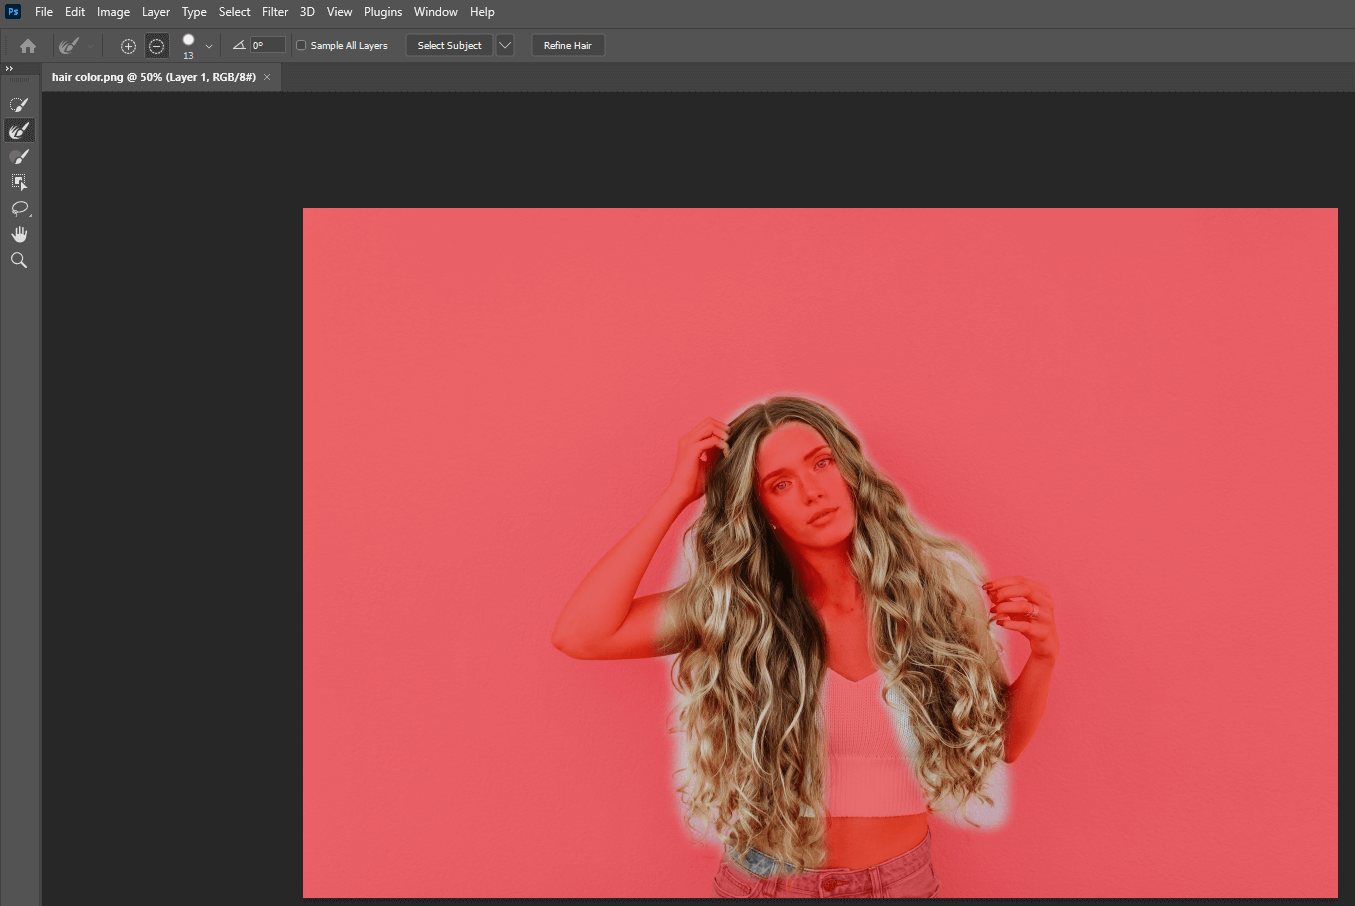 Use Photoshop Brush Tool to further select the hair